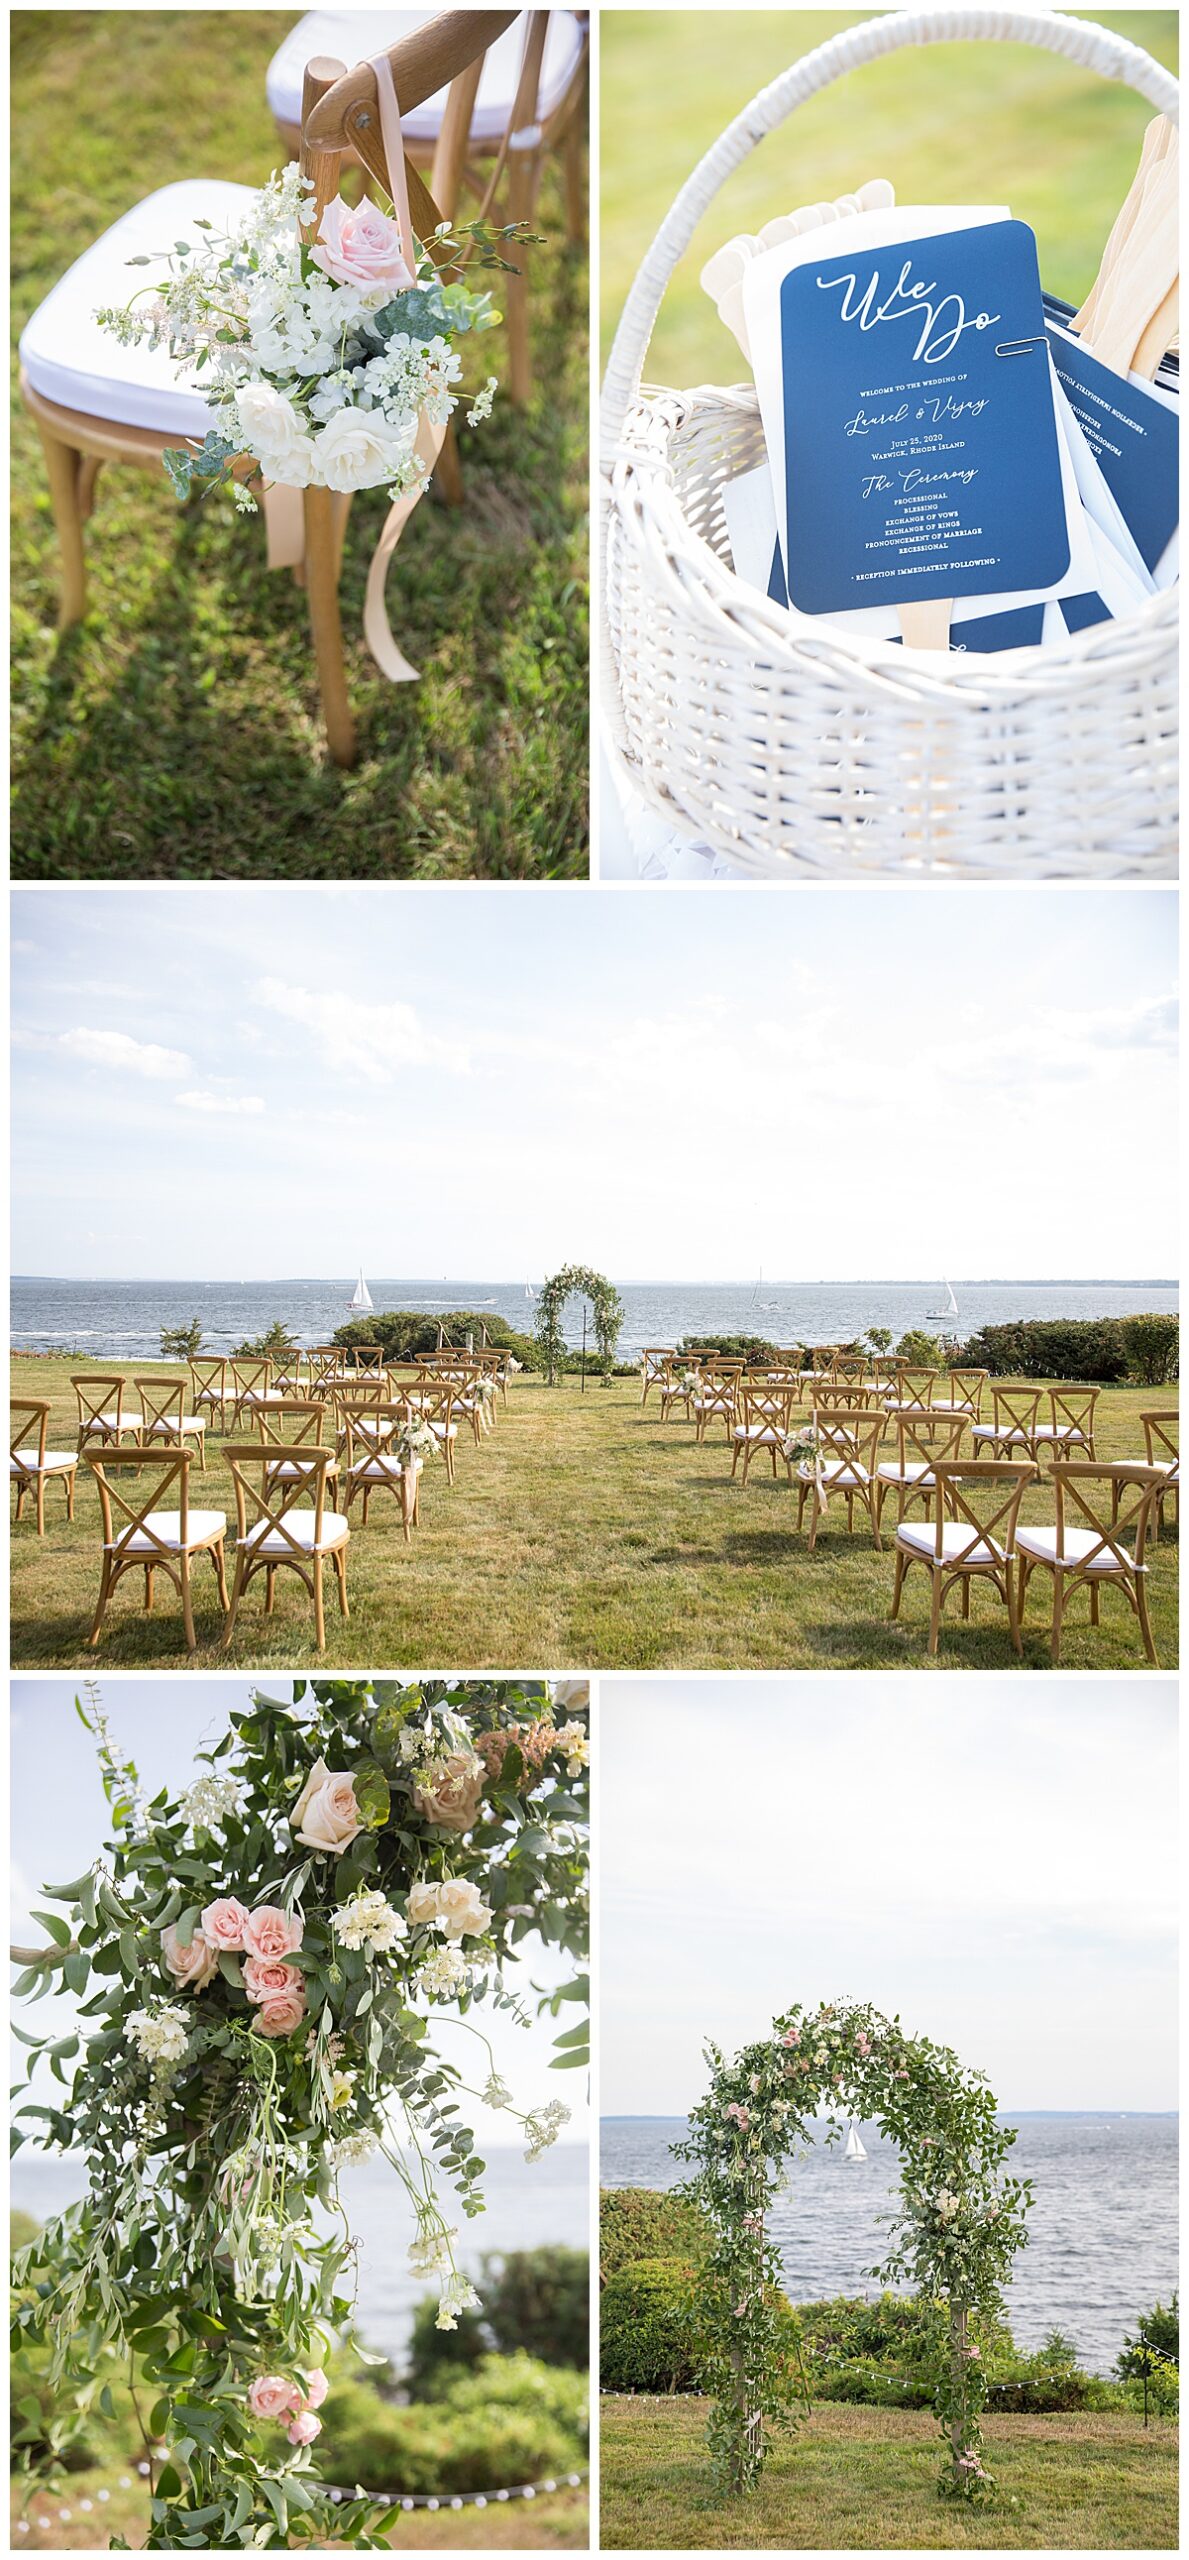 The Wedding Ceremony at this backyard wedding was set against the backdrop of Narraganset Bay. 